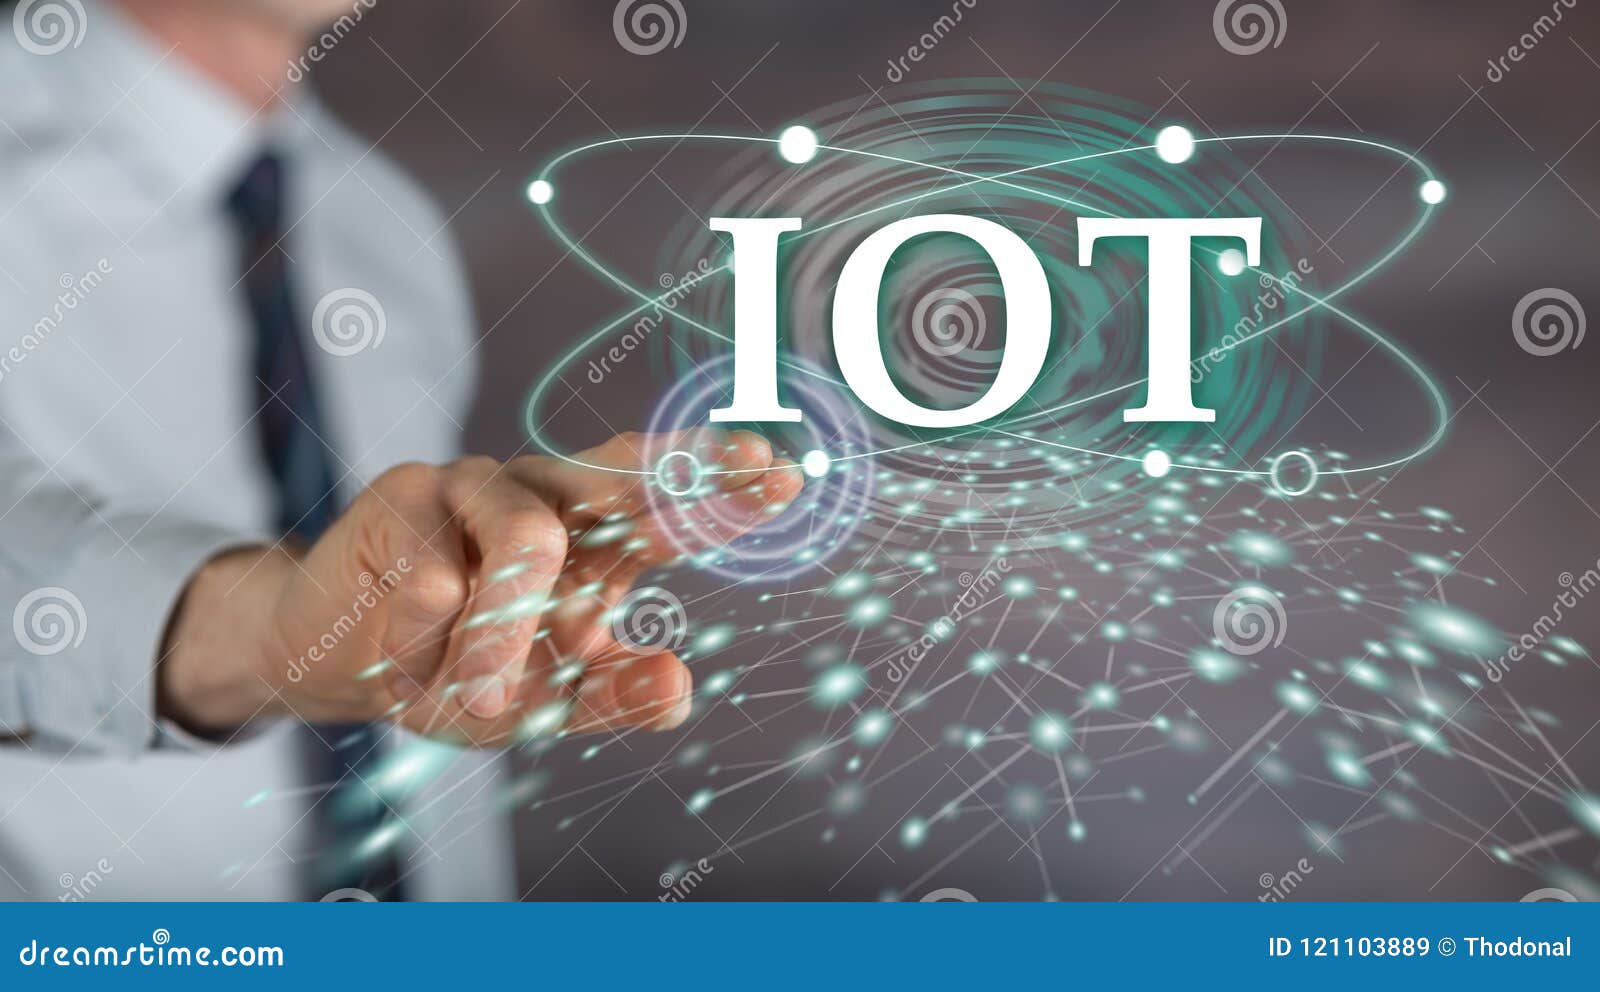 Man Touching an Iot Concept Stock Image - Image of cloud, connected ...